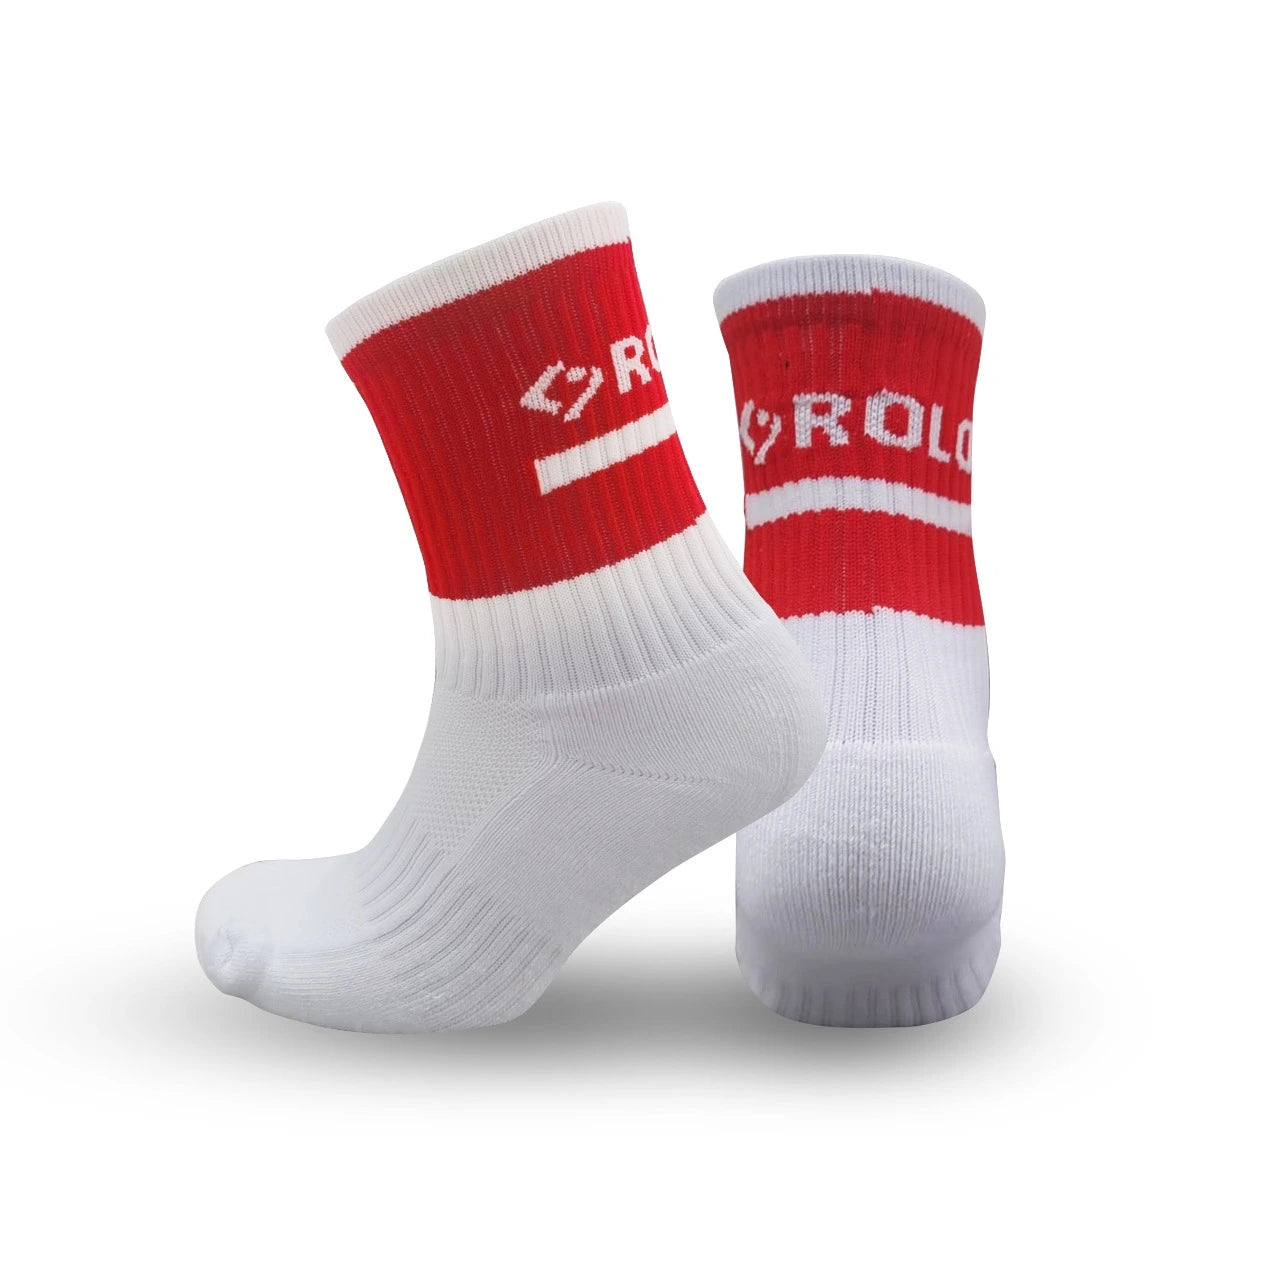 Red and White Sock Bundle